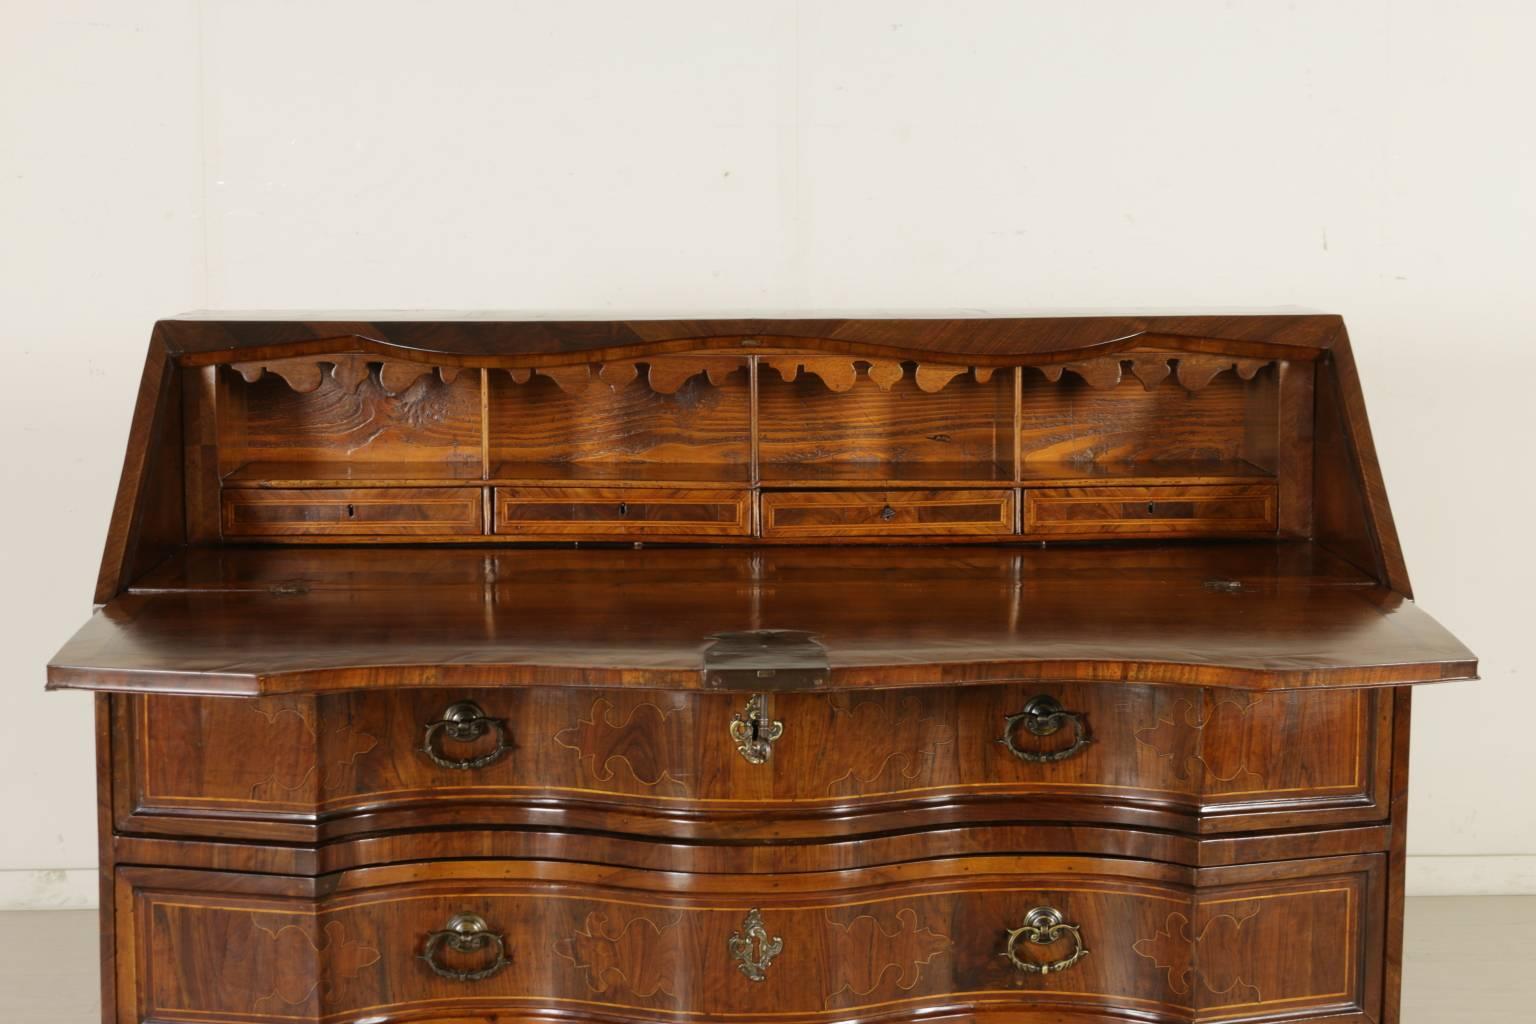 An early 18th century walnut and olive tree veneered drop-leaf desk and chest of drawers, manufactured in Northern Italy. Shaped drop-leaf door and three drawers. Four internal drawers with locks and open compartments. Olive tree and maple inserts.